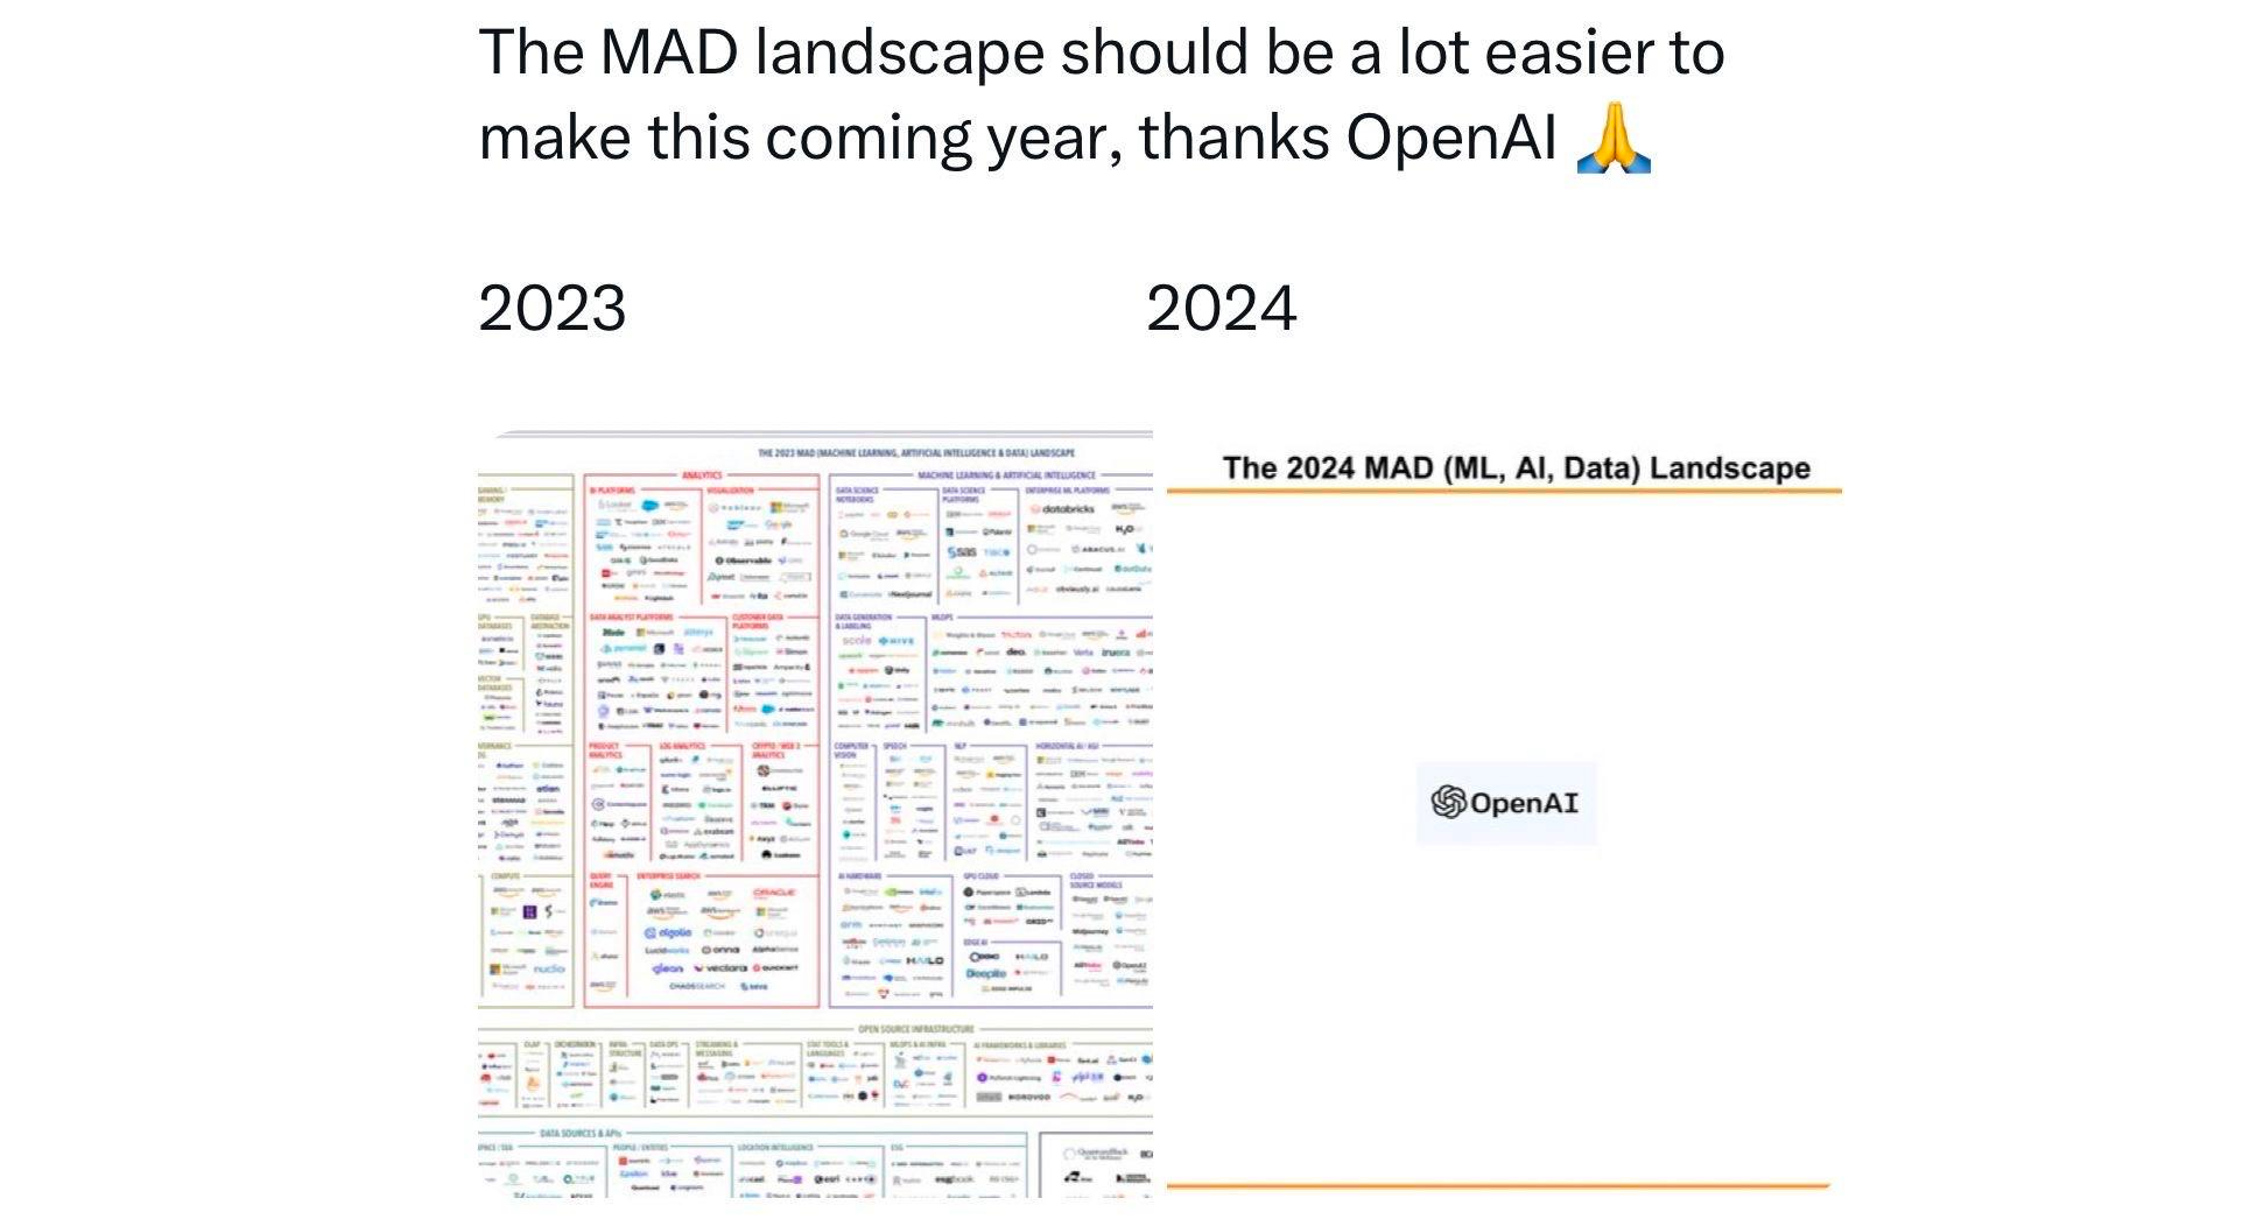 Could this be the future of the MAD (Machine Learning, Artificial Intelligence) Landscape? - Source unknown